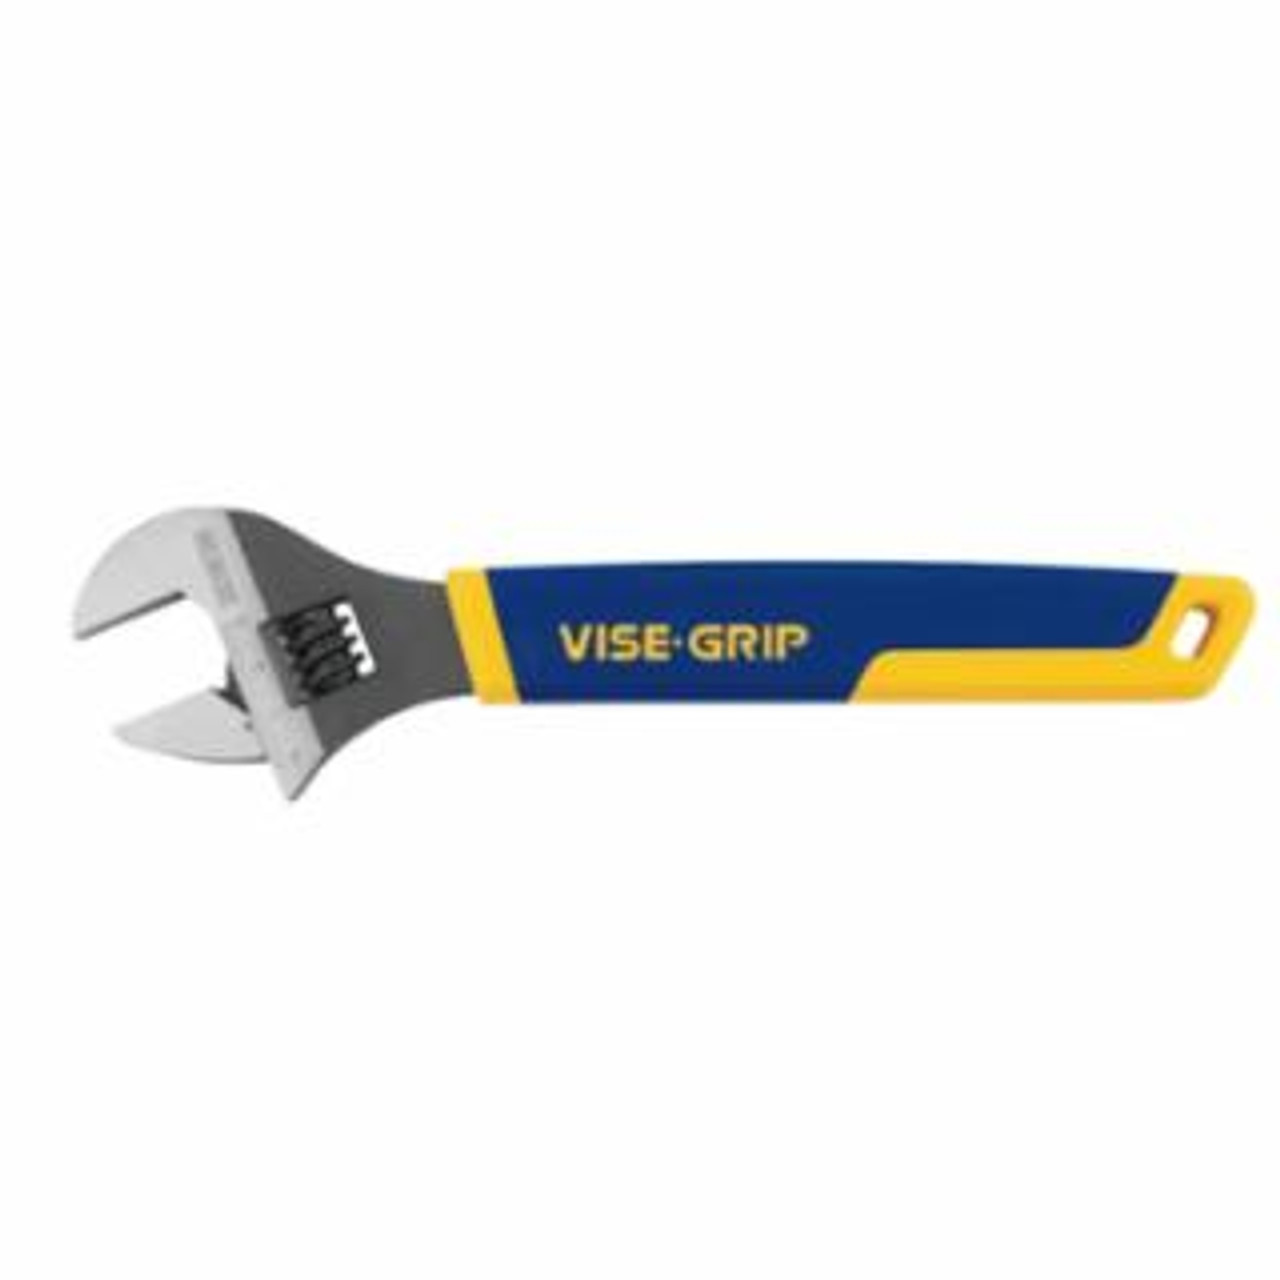  Vise-Grip Adjustable Wrenches, 12 in Long, 1 1/2 in Opening, Chrome